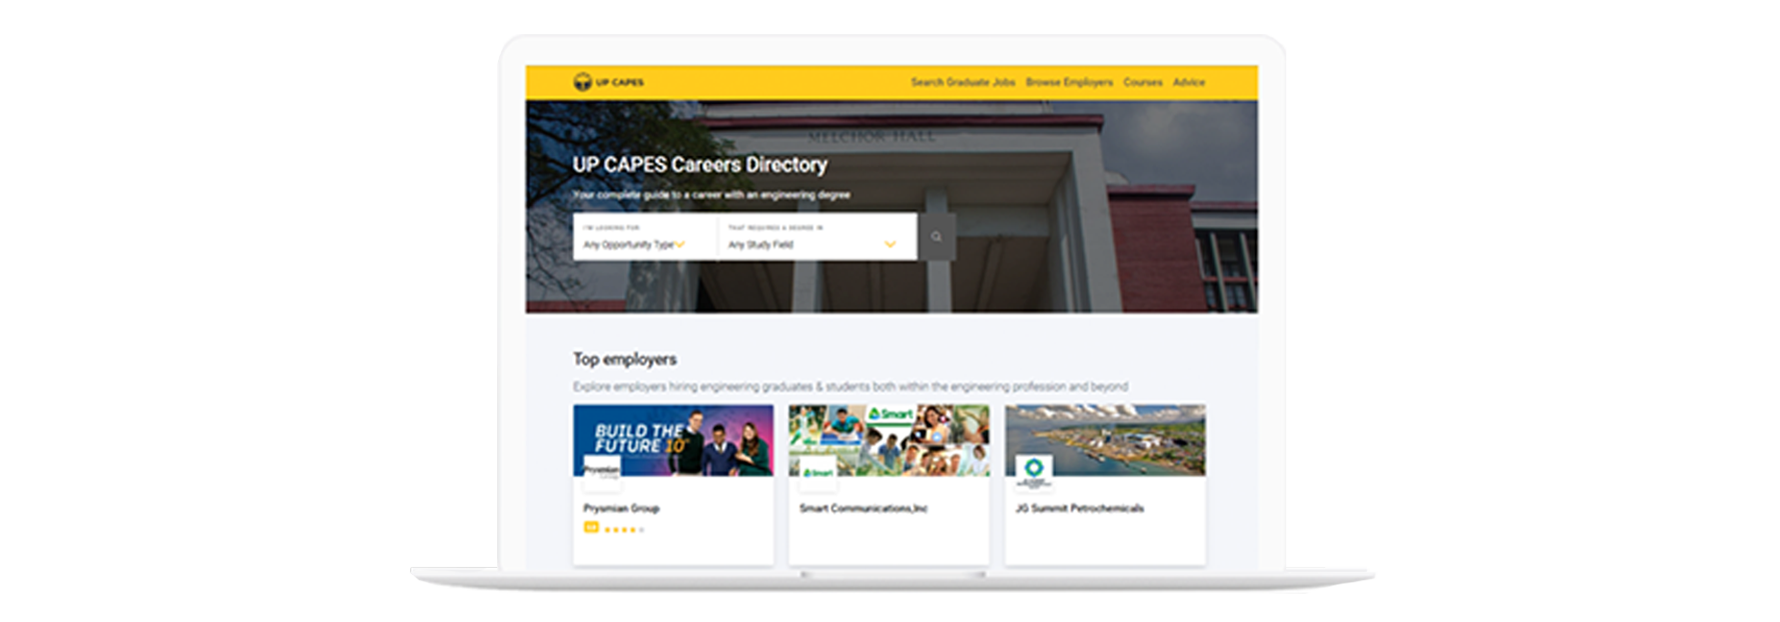 UP CAPES Careers Directory